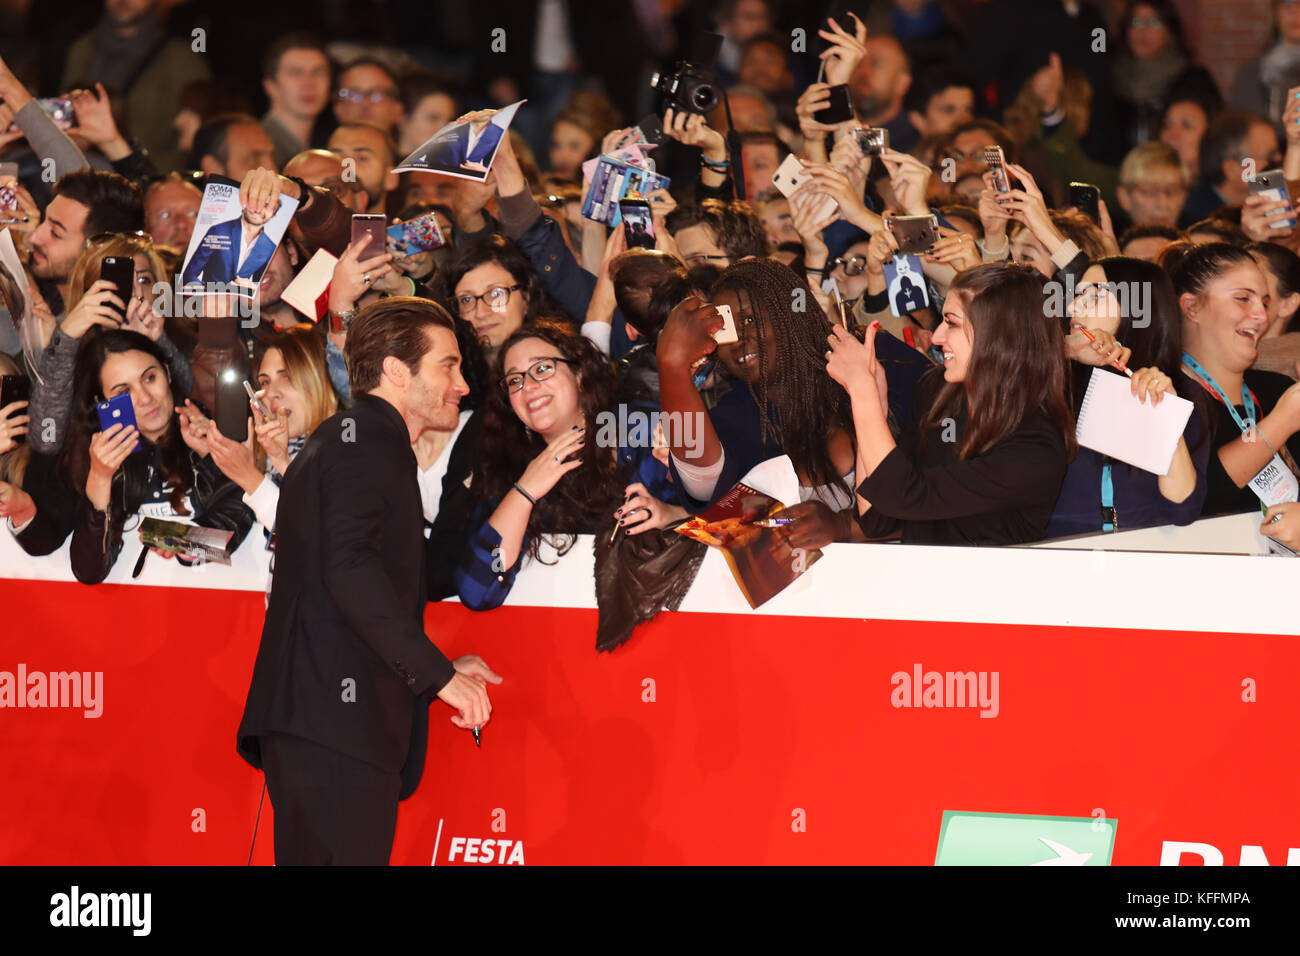 Rome Italy. October 28, 2017. Jake Gyllenhaal with fans during the red carpet of the movie 'Stronger' with US actor Jake Gyllenhaal during Film Fest Credit: Gennaro Leonardi / Alamy Live News Stock Photo